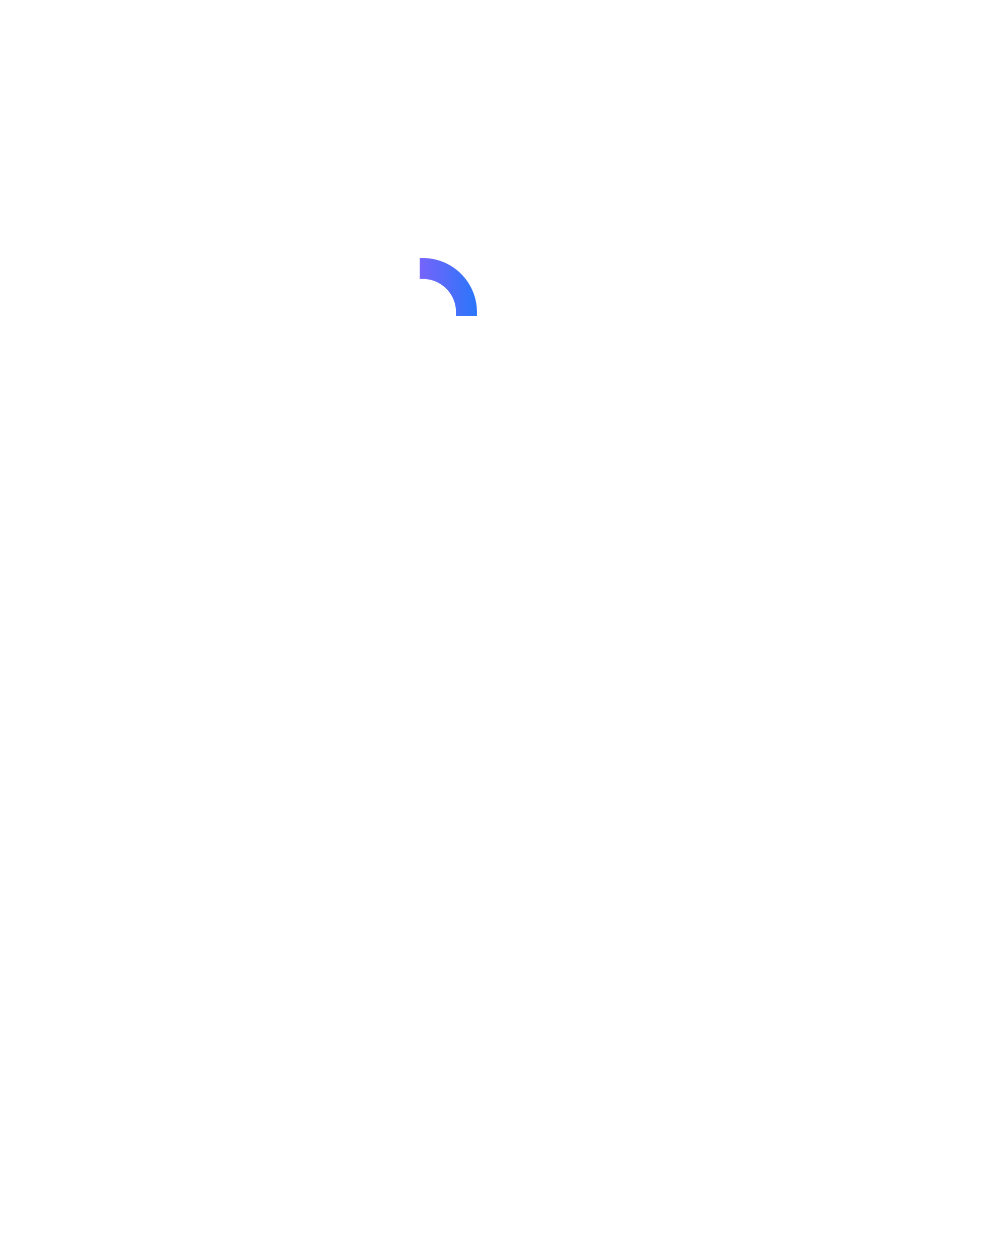 Copy of The MDU Update - Template (700 × 875 px) (1000 × 1250 px)